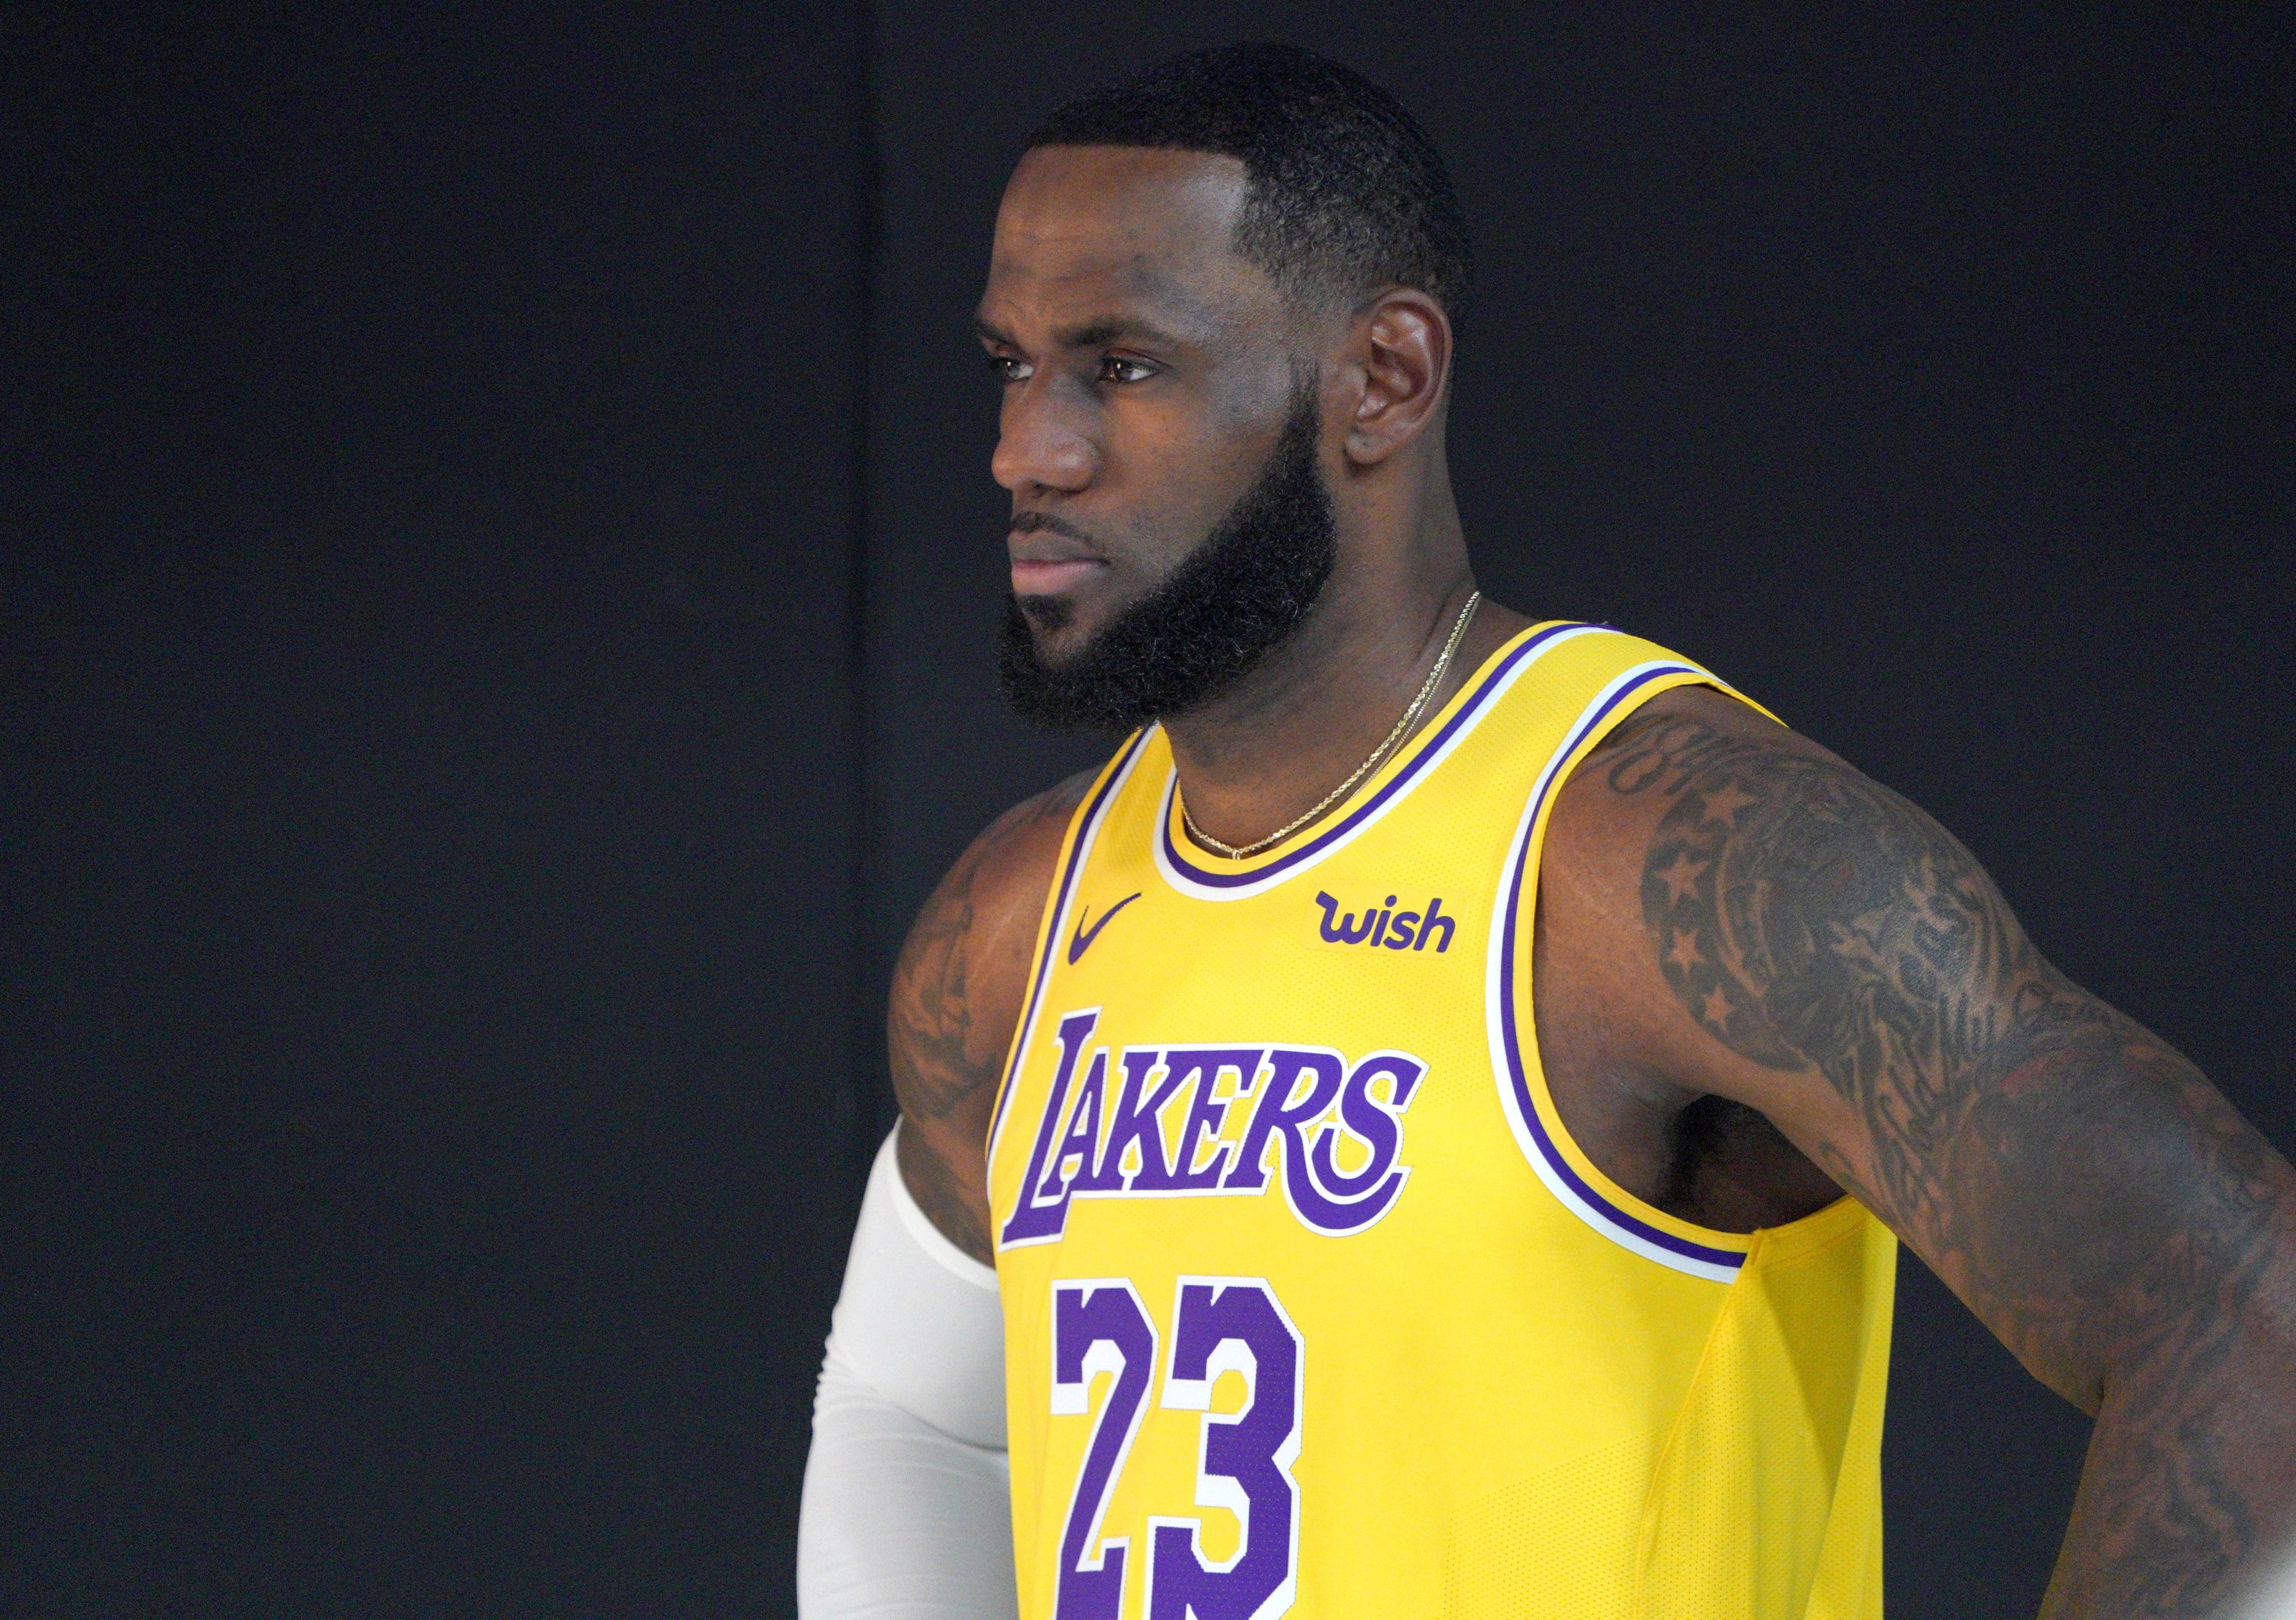 LeBron James will reportedly switch back to No. 6 next season